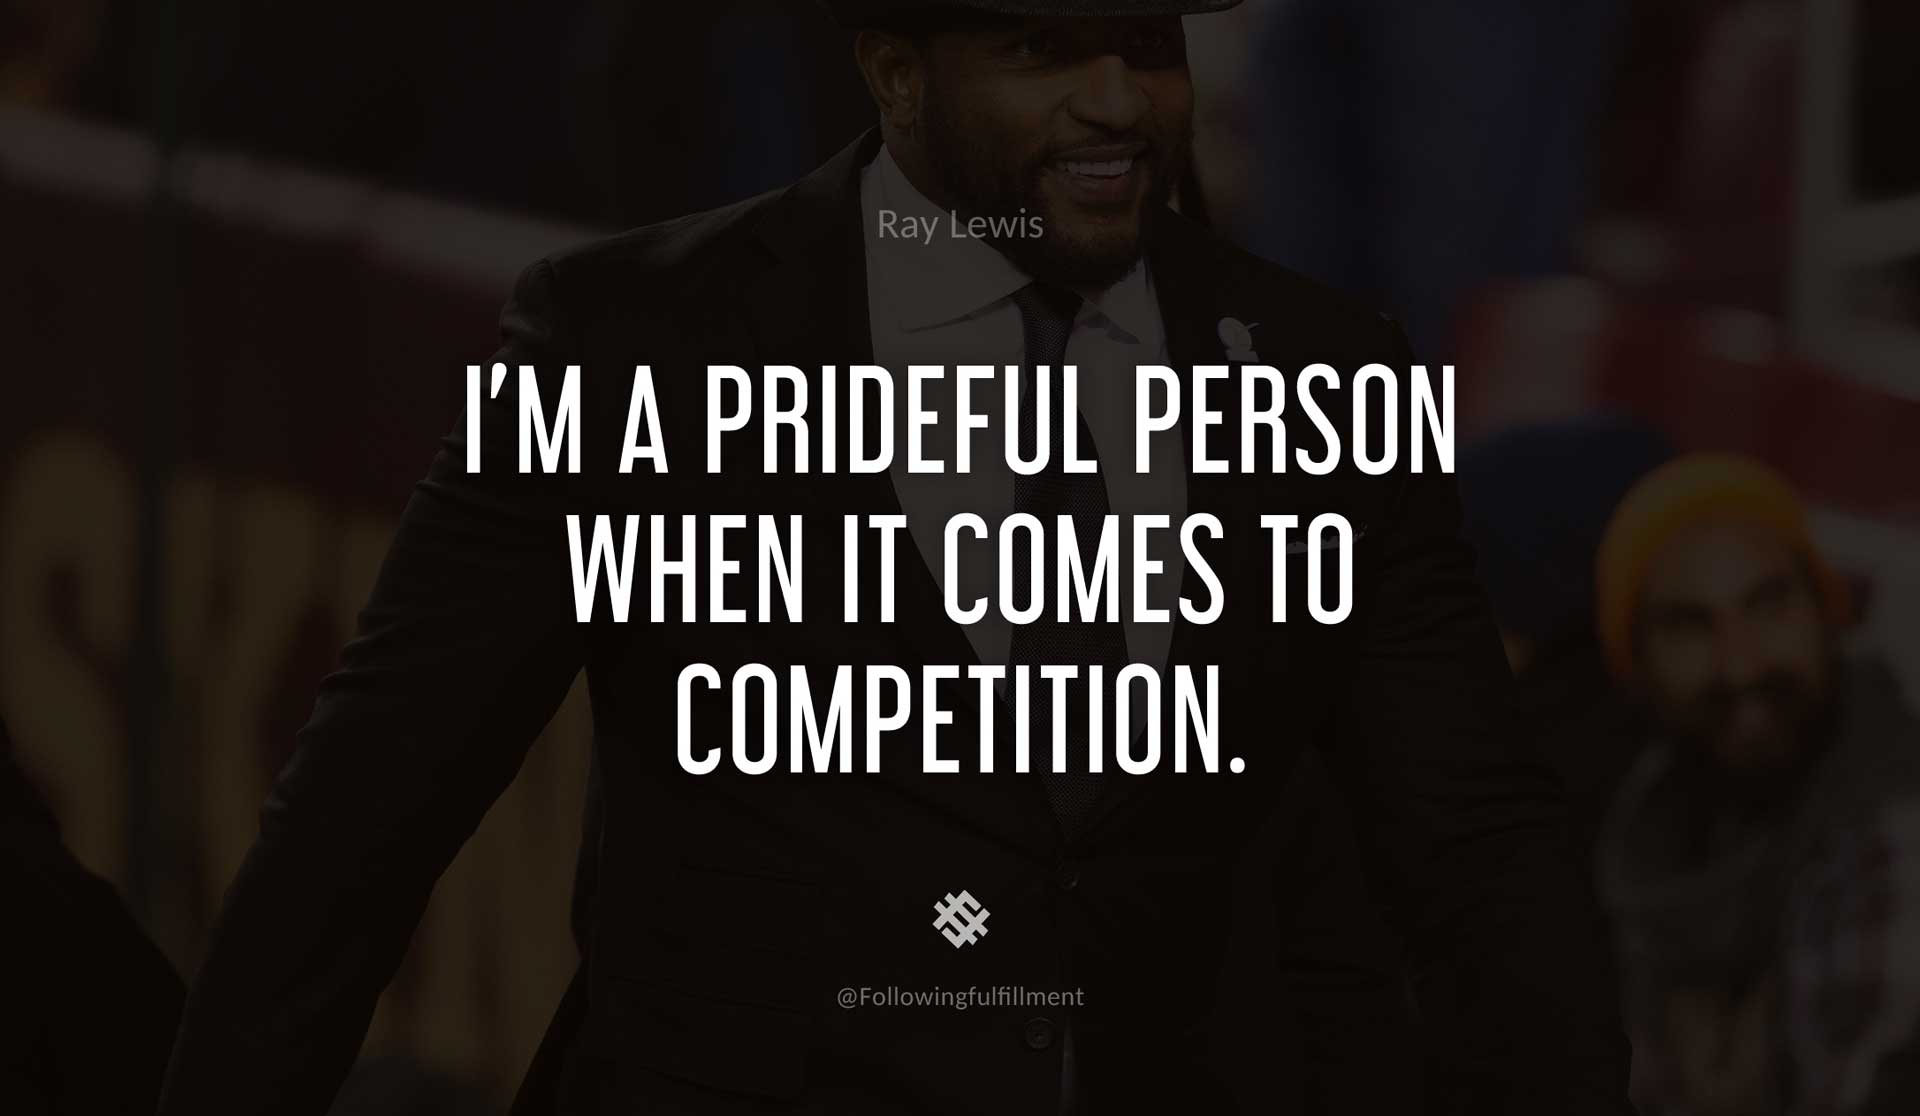 I'm-a-prideful-person-when-it-comes-to-competition.-RAY-LEWIS-Quote.jpg